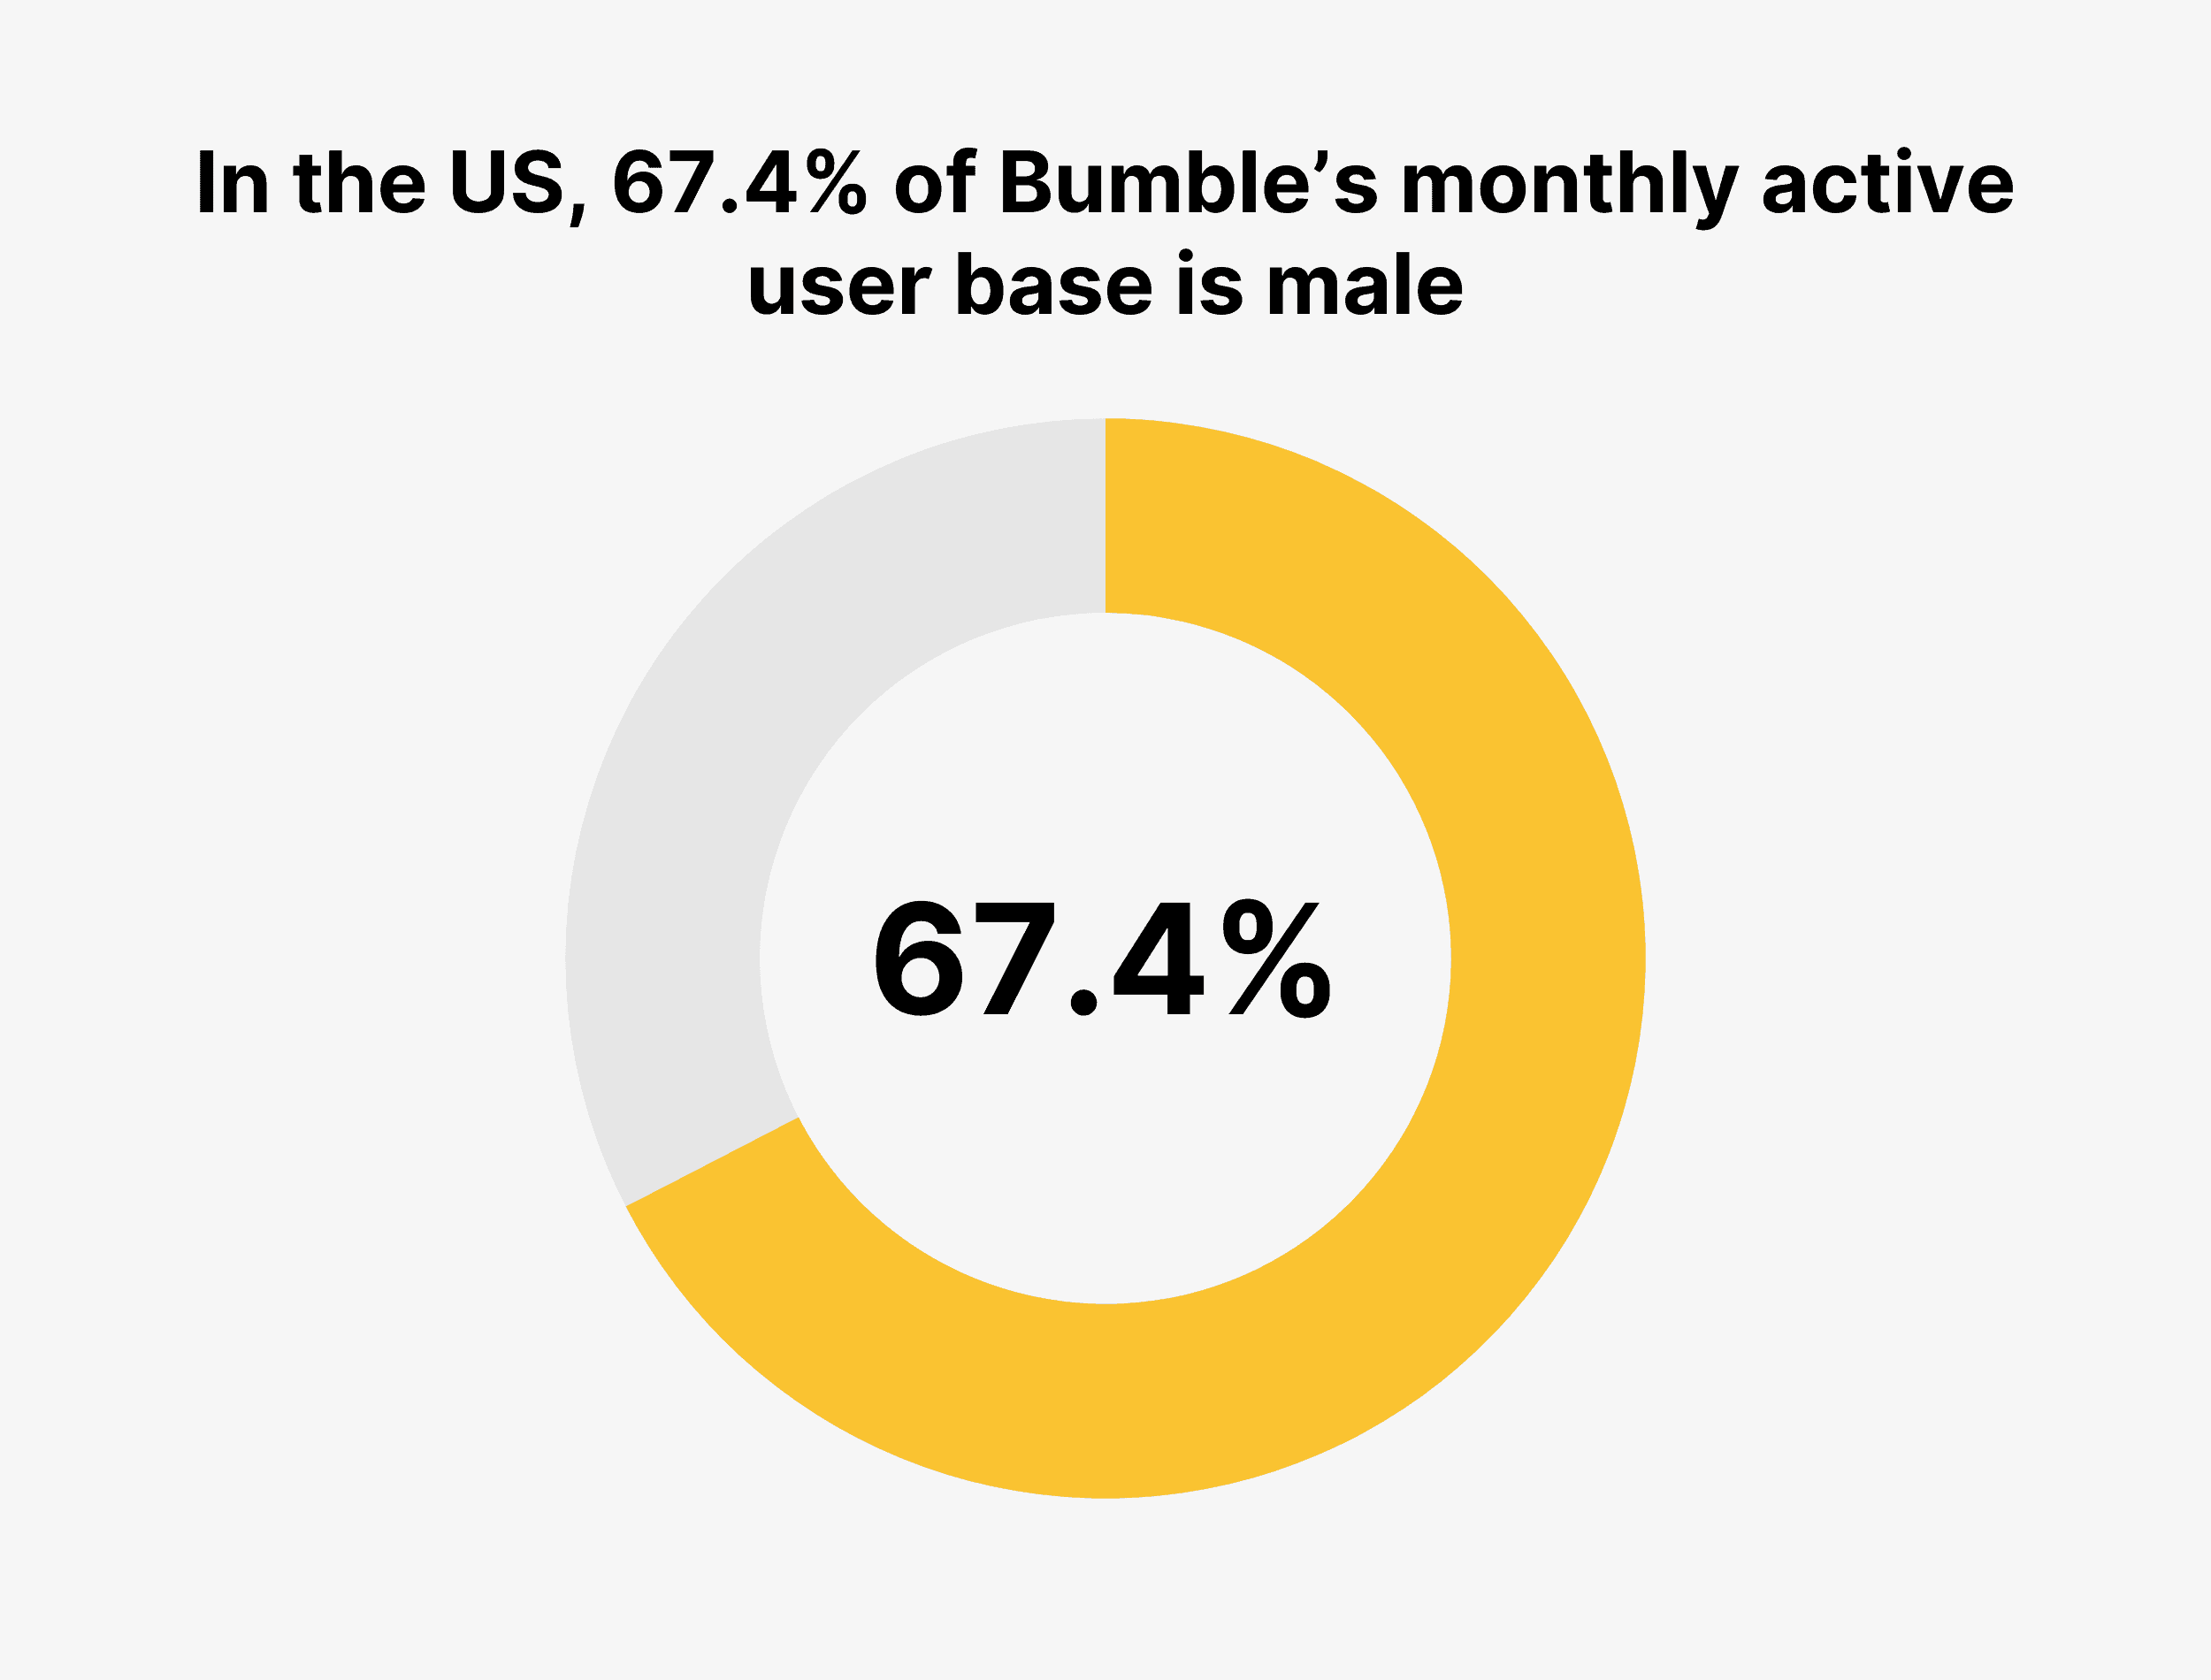 In the US, 67.4% of Bumble’s monthly active user base is male